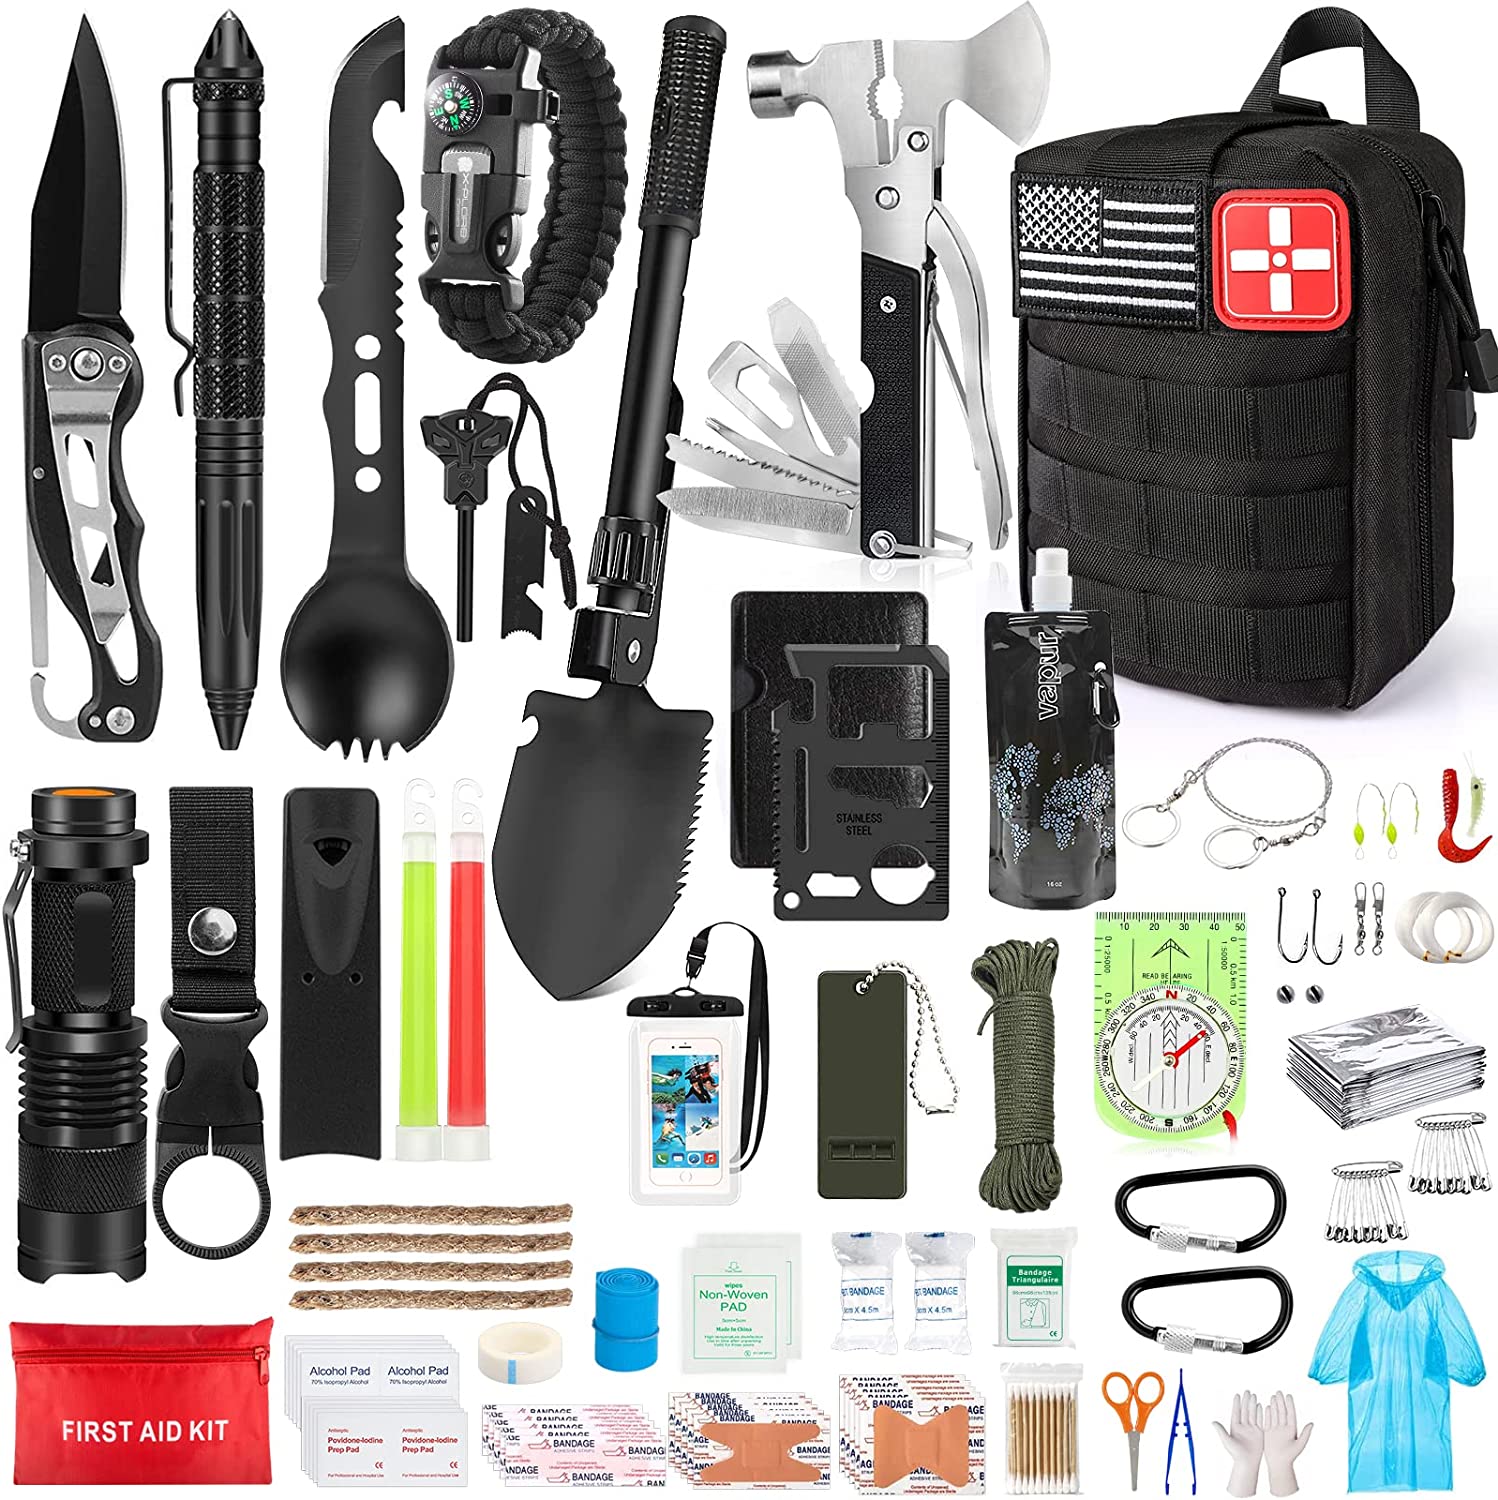 235Pcs Emergency Survival Kit and First Aid Kit Professional Survival Gear Tool with IFAK Molle System Compatible Bag, Gift for Men Camping Outdoor Adventure Boat Hunting Hiking Home Car & Earthquake